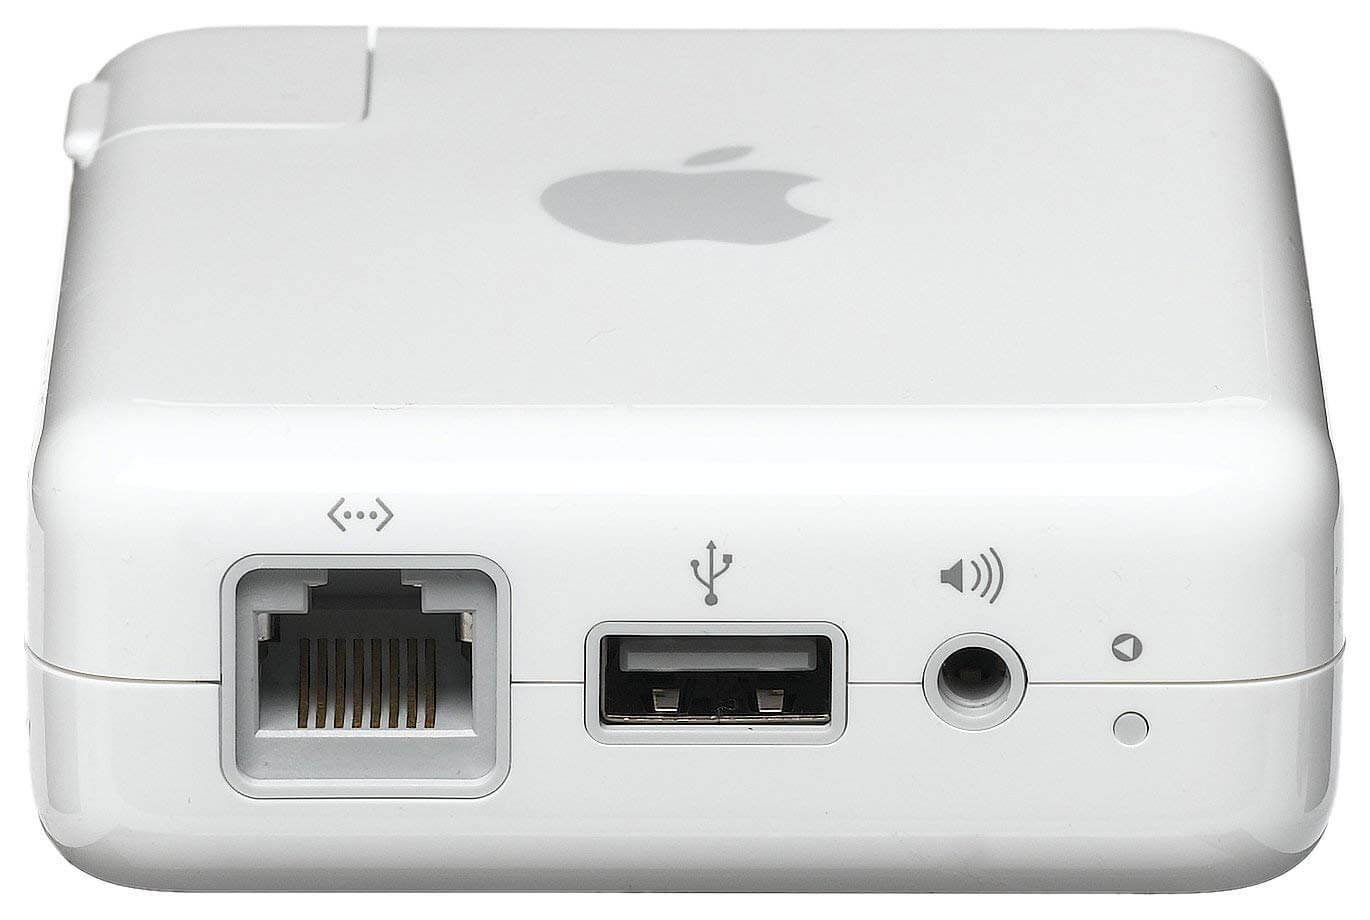 airport express ethernet ports